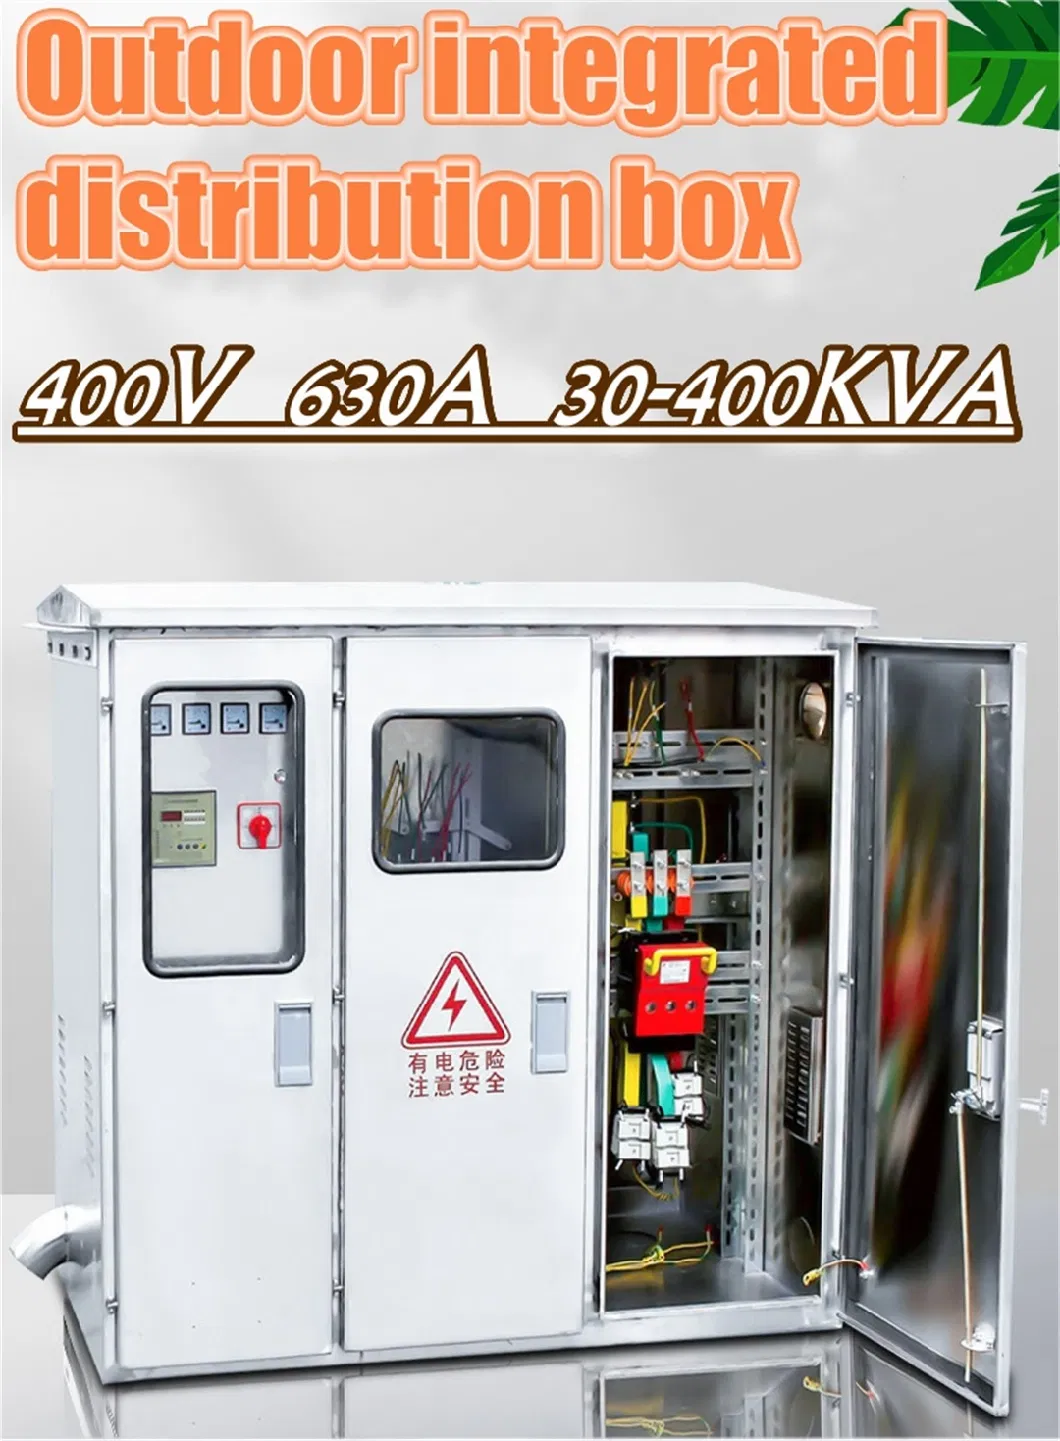 Jp 400V 630A 30-400kVA Low Voltage Integrated Distribution Box Electrical Box (Compensation/Control/Terminal/Lighting)